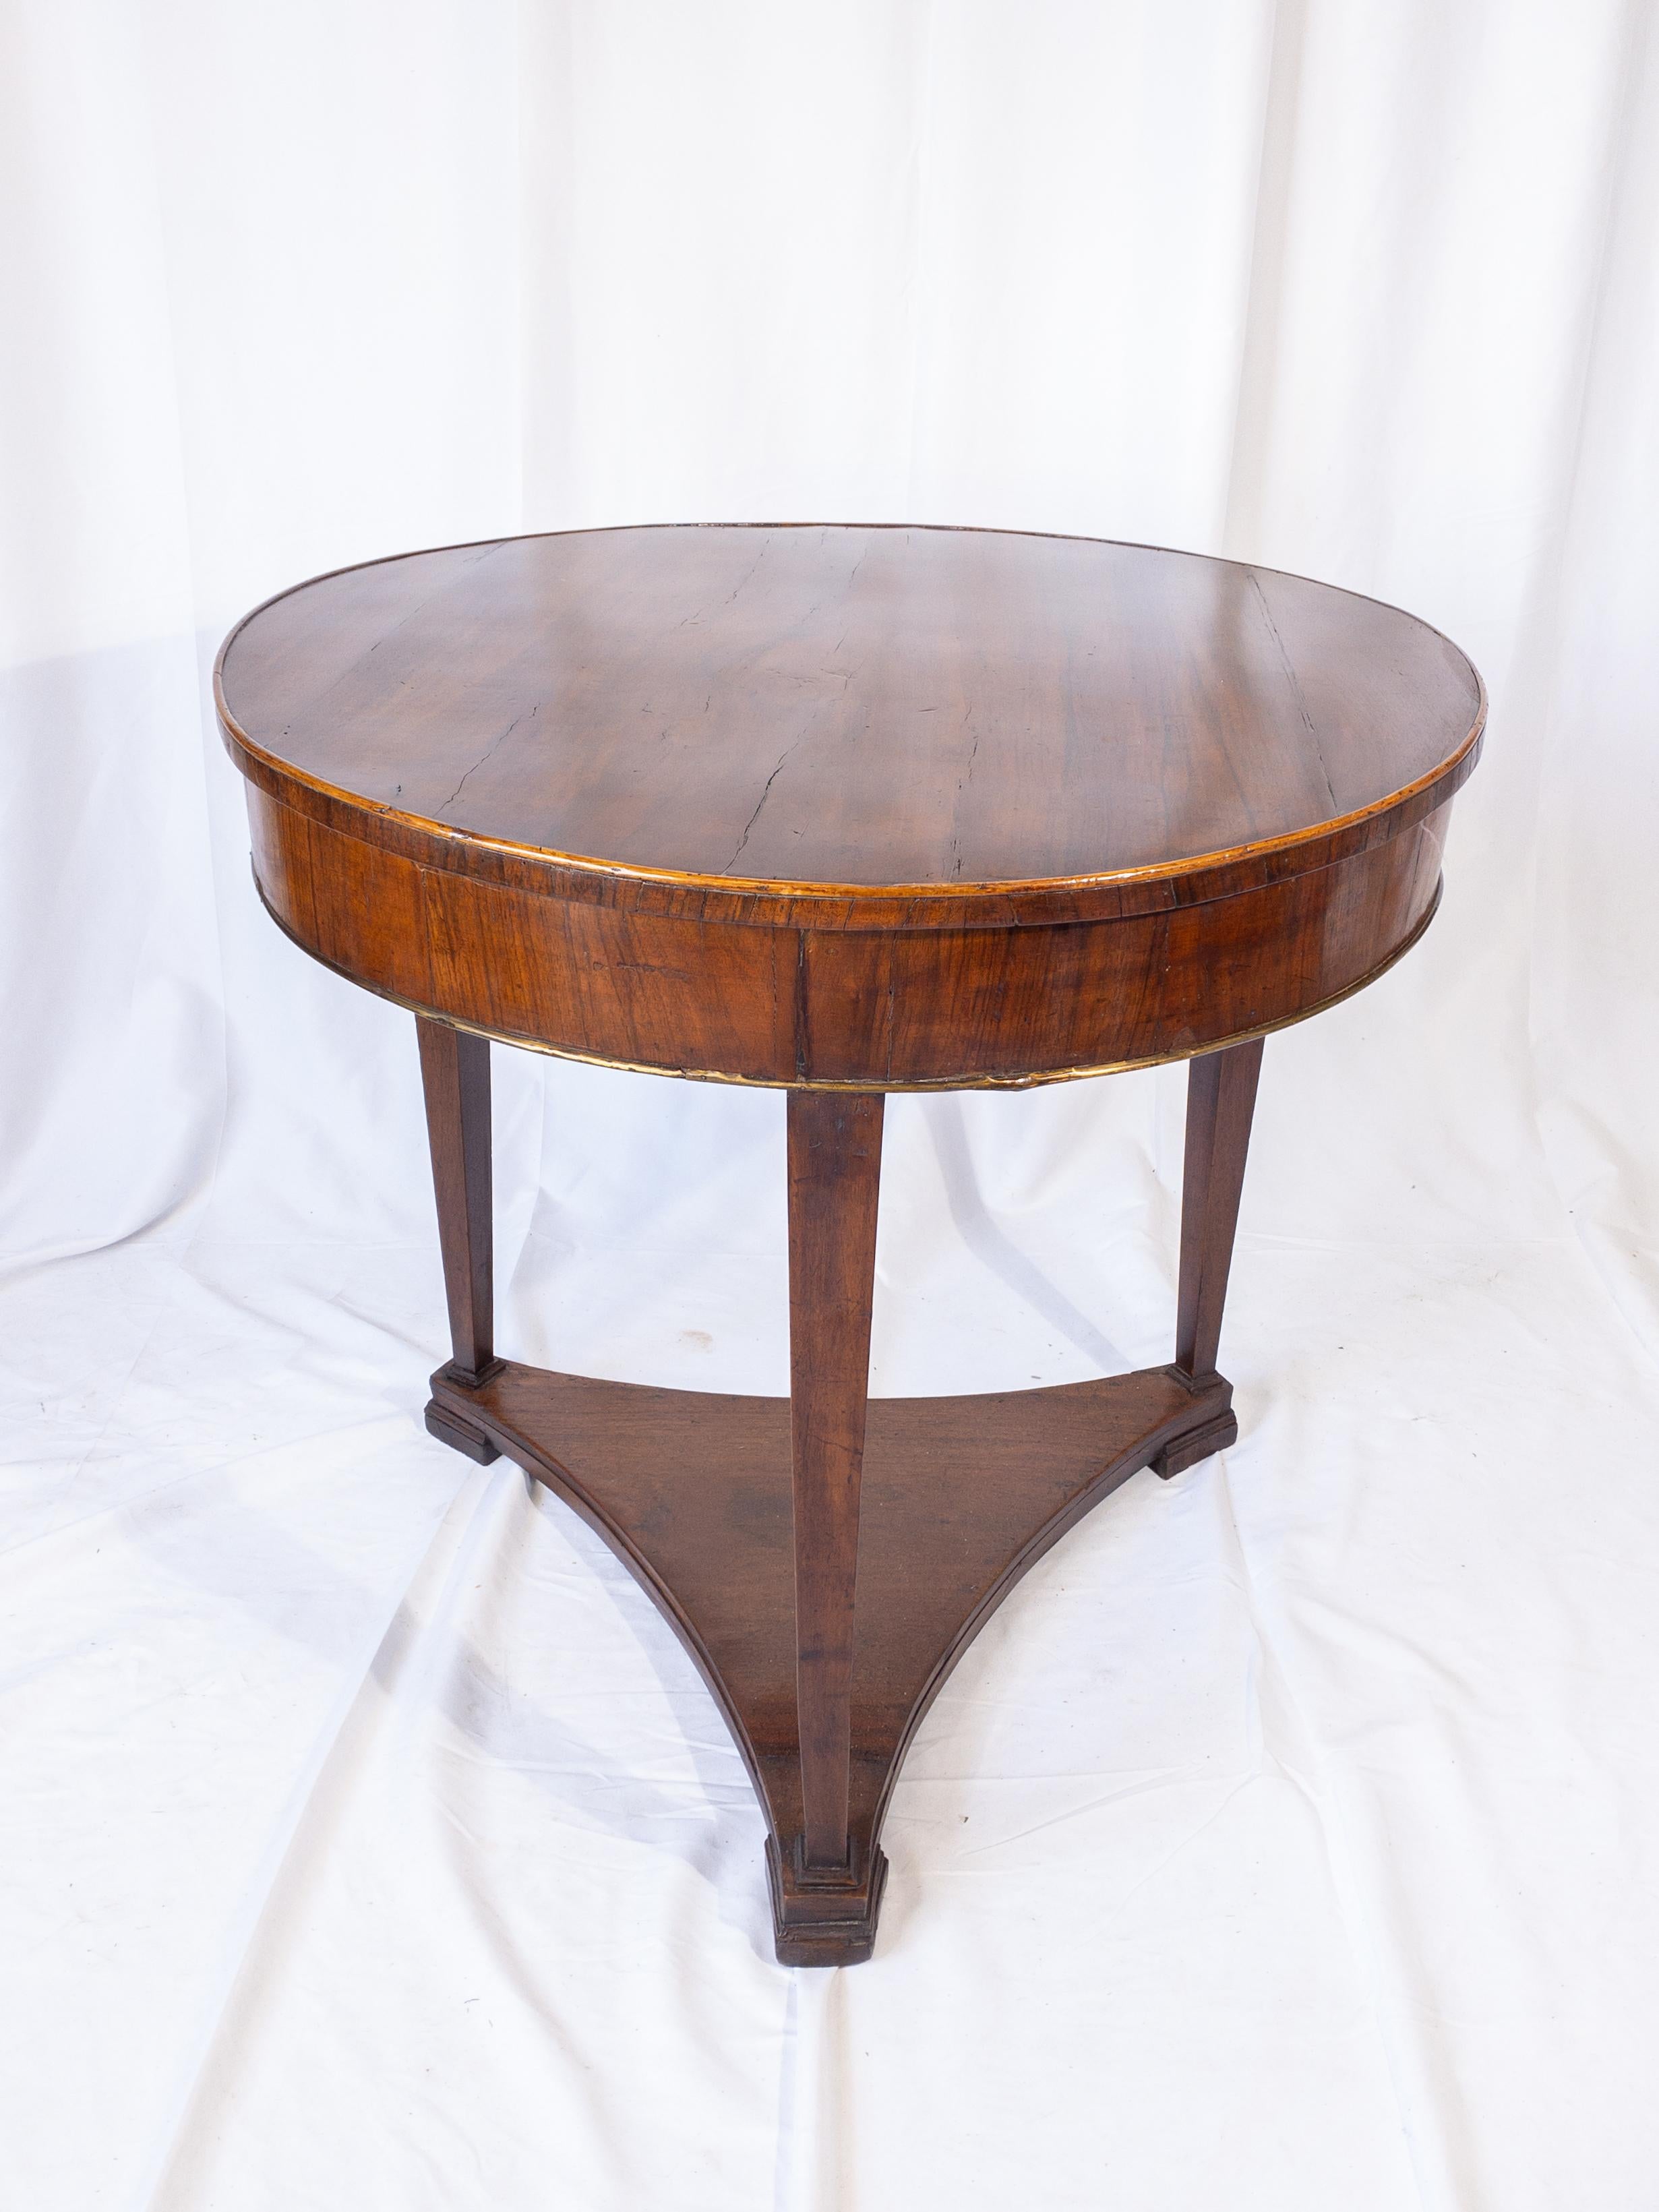 Wood 19th Century Italian Walnut Gueridon Table with Trifold Base & Lock Drawer For Sale